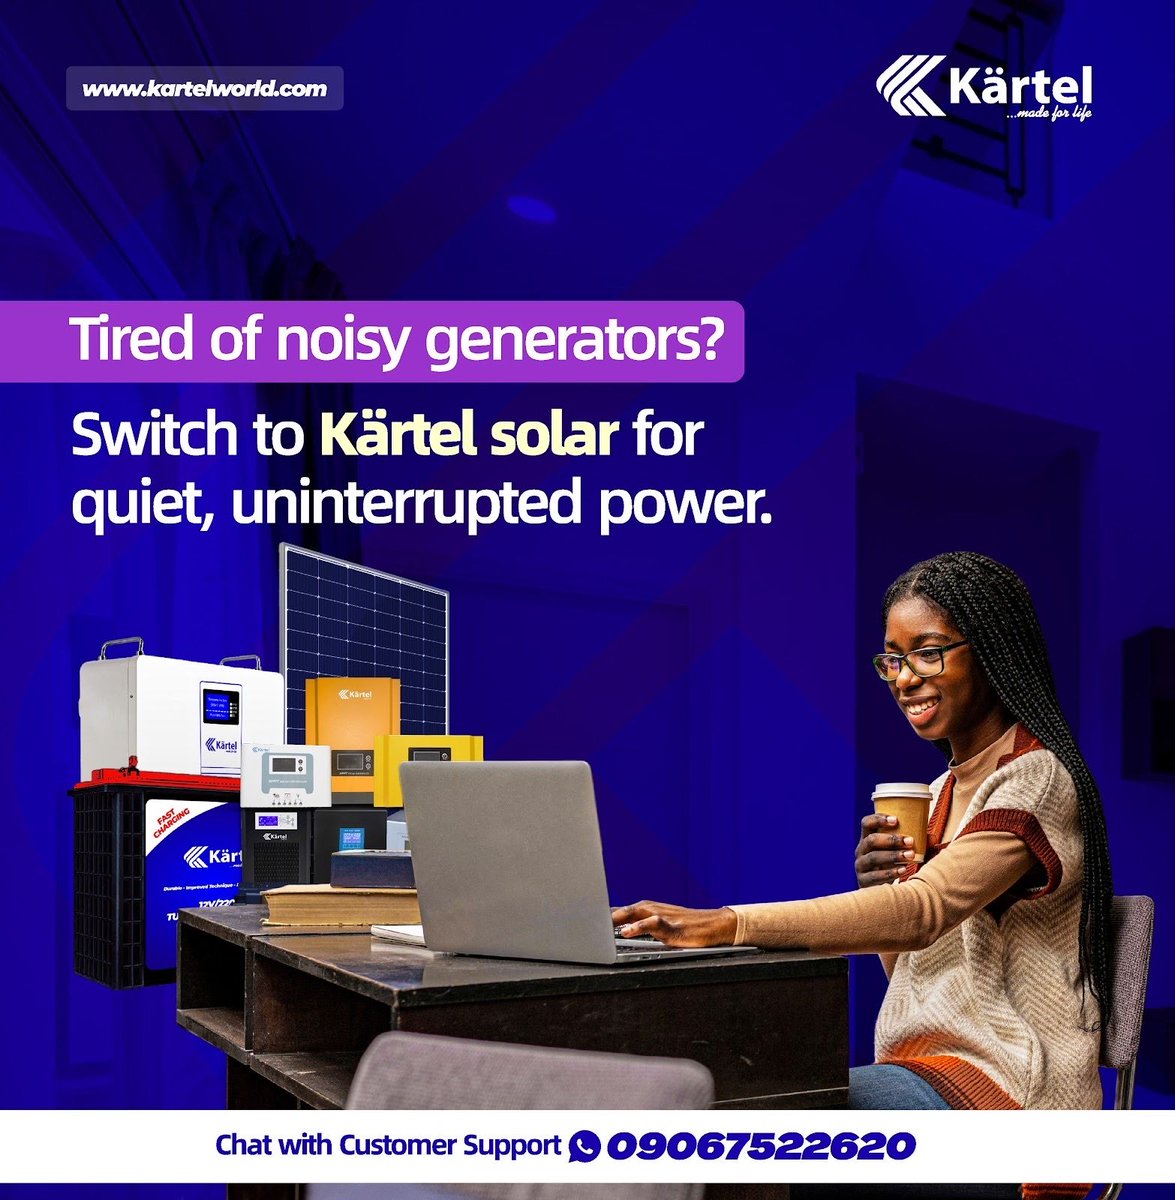 Fed up with the noise from generators? Make the switch to Kärtel solar for quiet, reliable power day and night. 🌞 #QuietPower #SolarEnergy #RenewableEnergy #CleanEnergy #SustainableLiving #NoMoreGenerators #UninterruptedPower